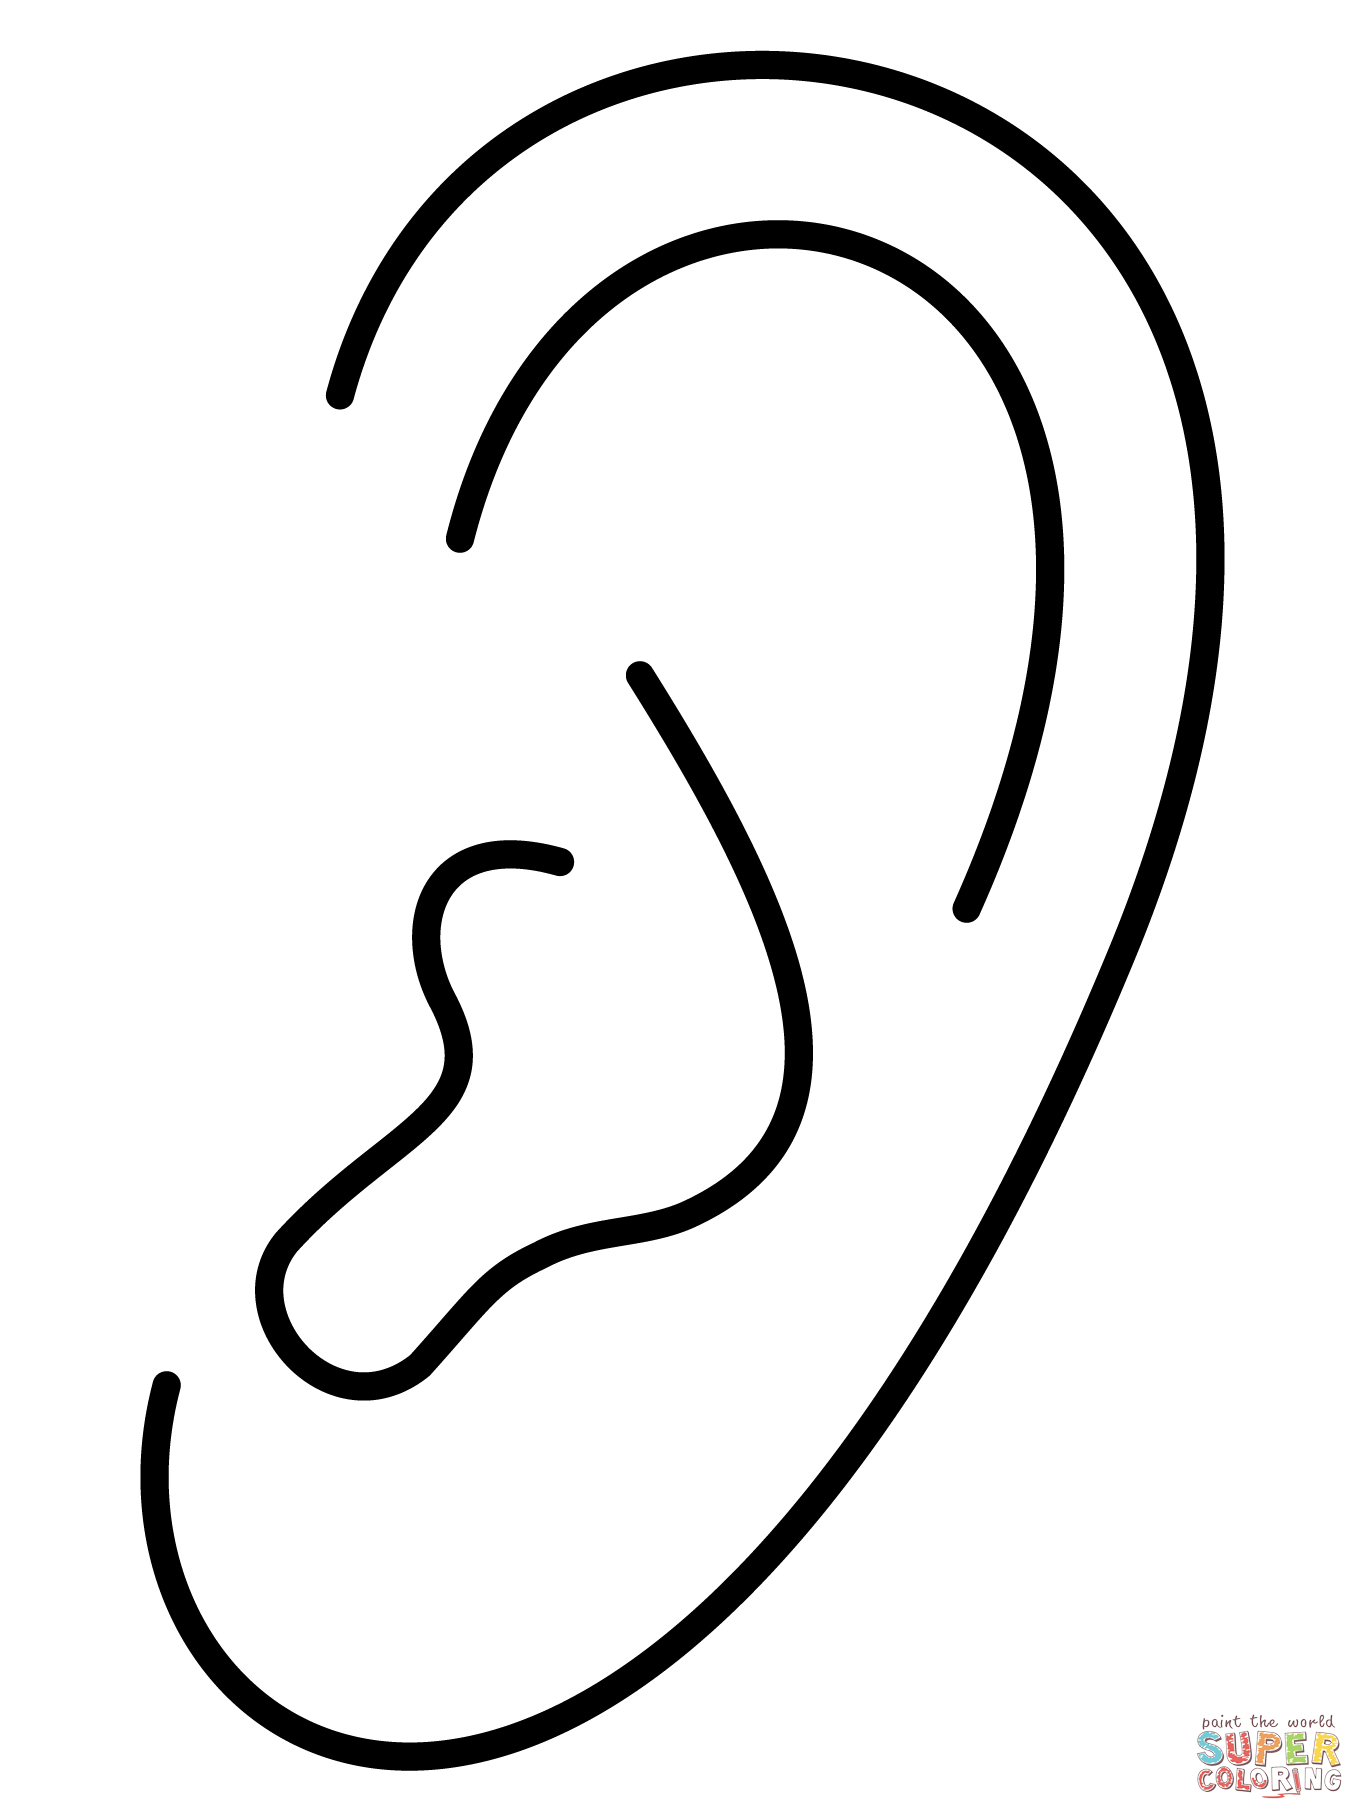 Ear emoji coloring page free printable coloring pages